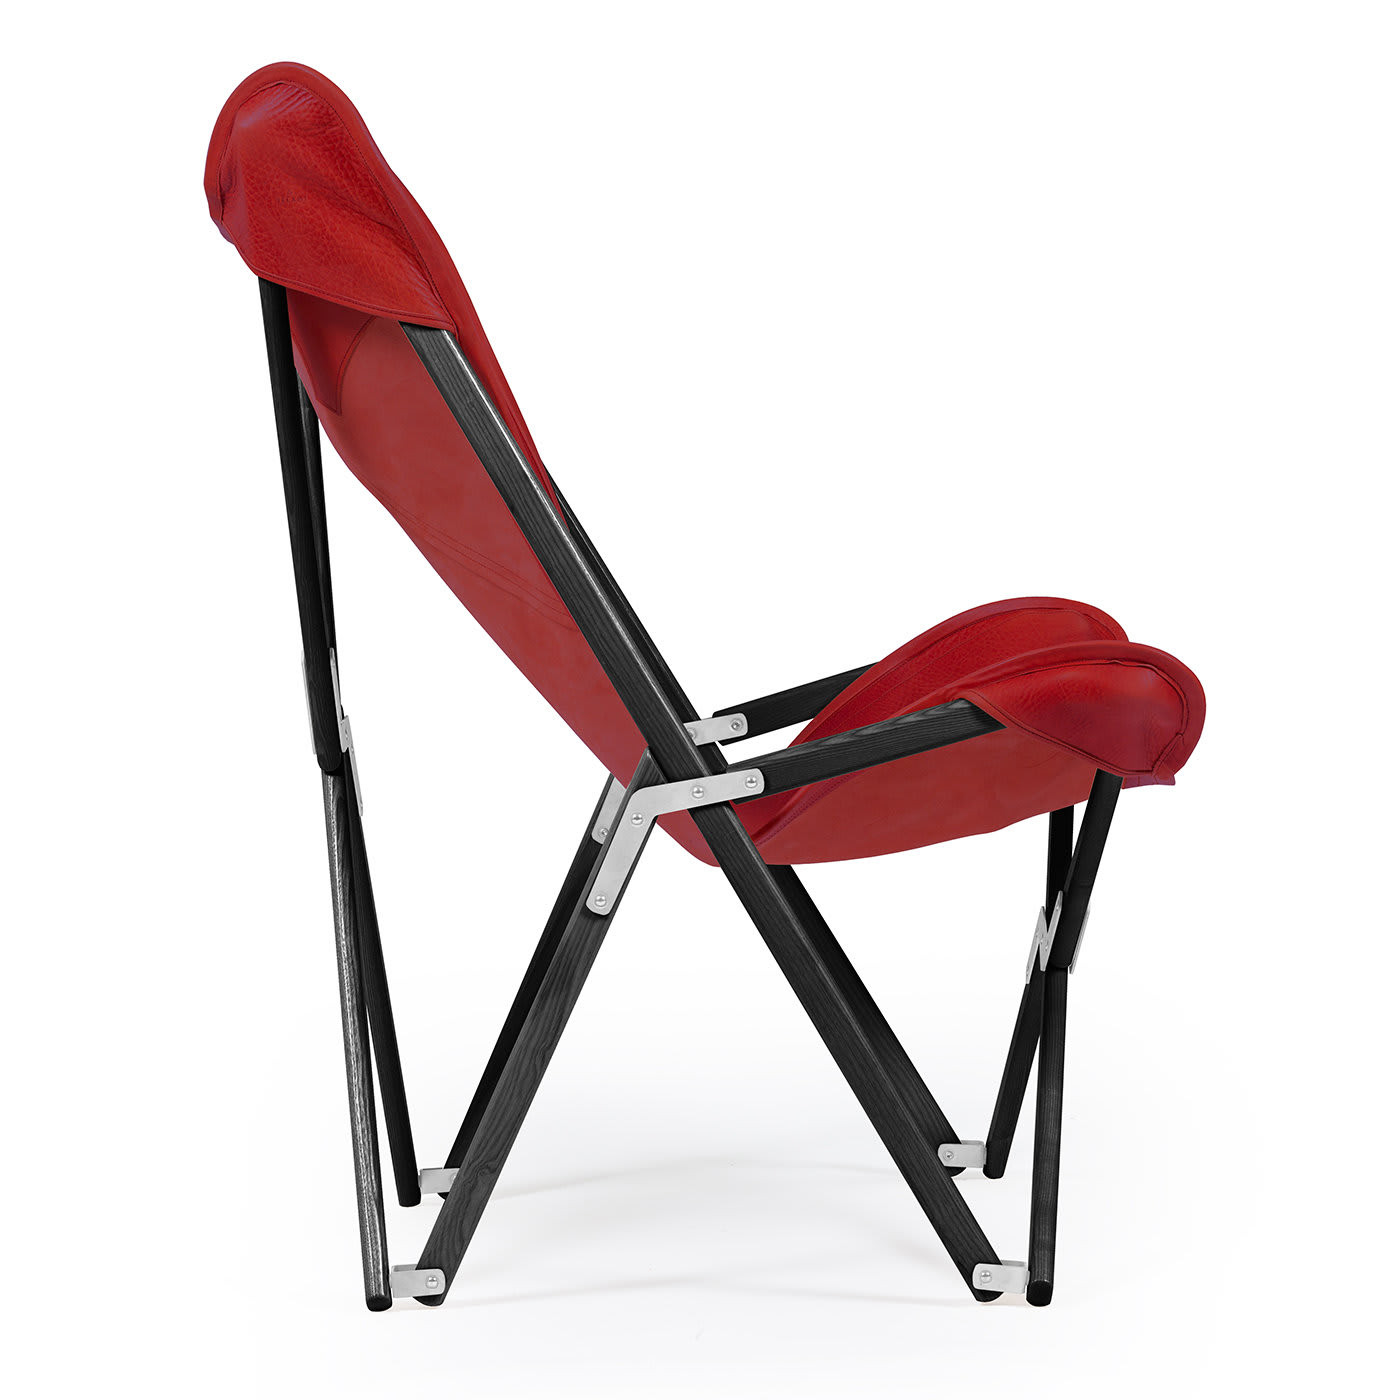 Tripolina Armchair in Red Leather - Telami